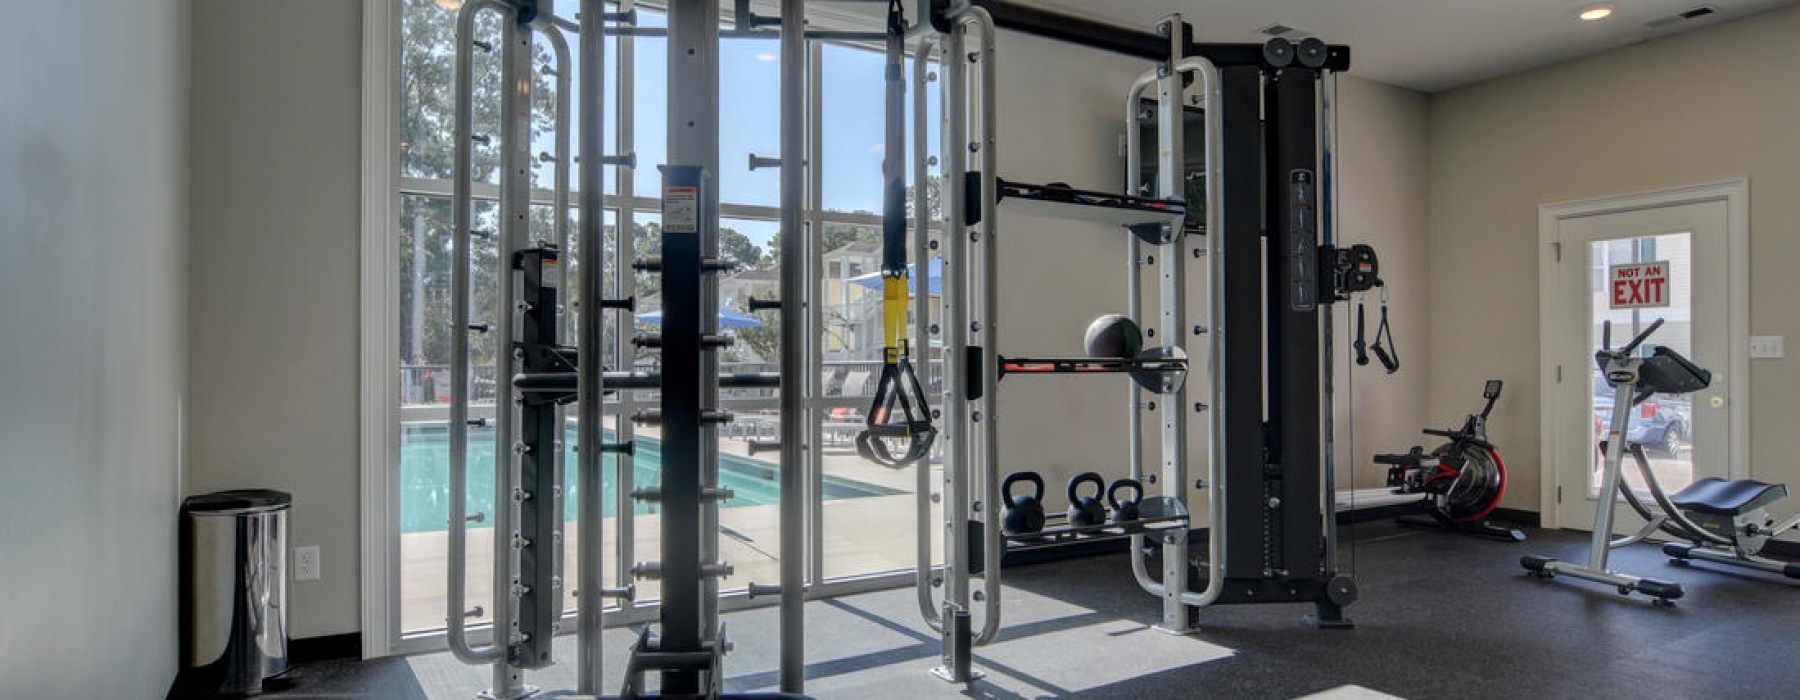 Community fitness center at The Park at Three Oaks